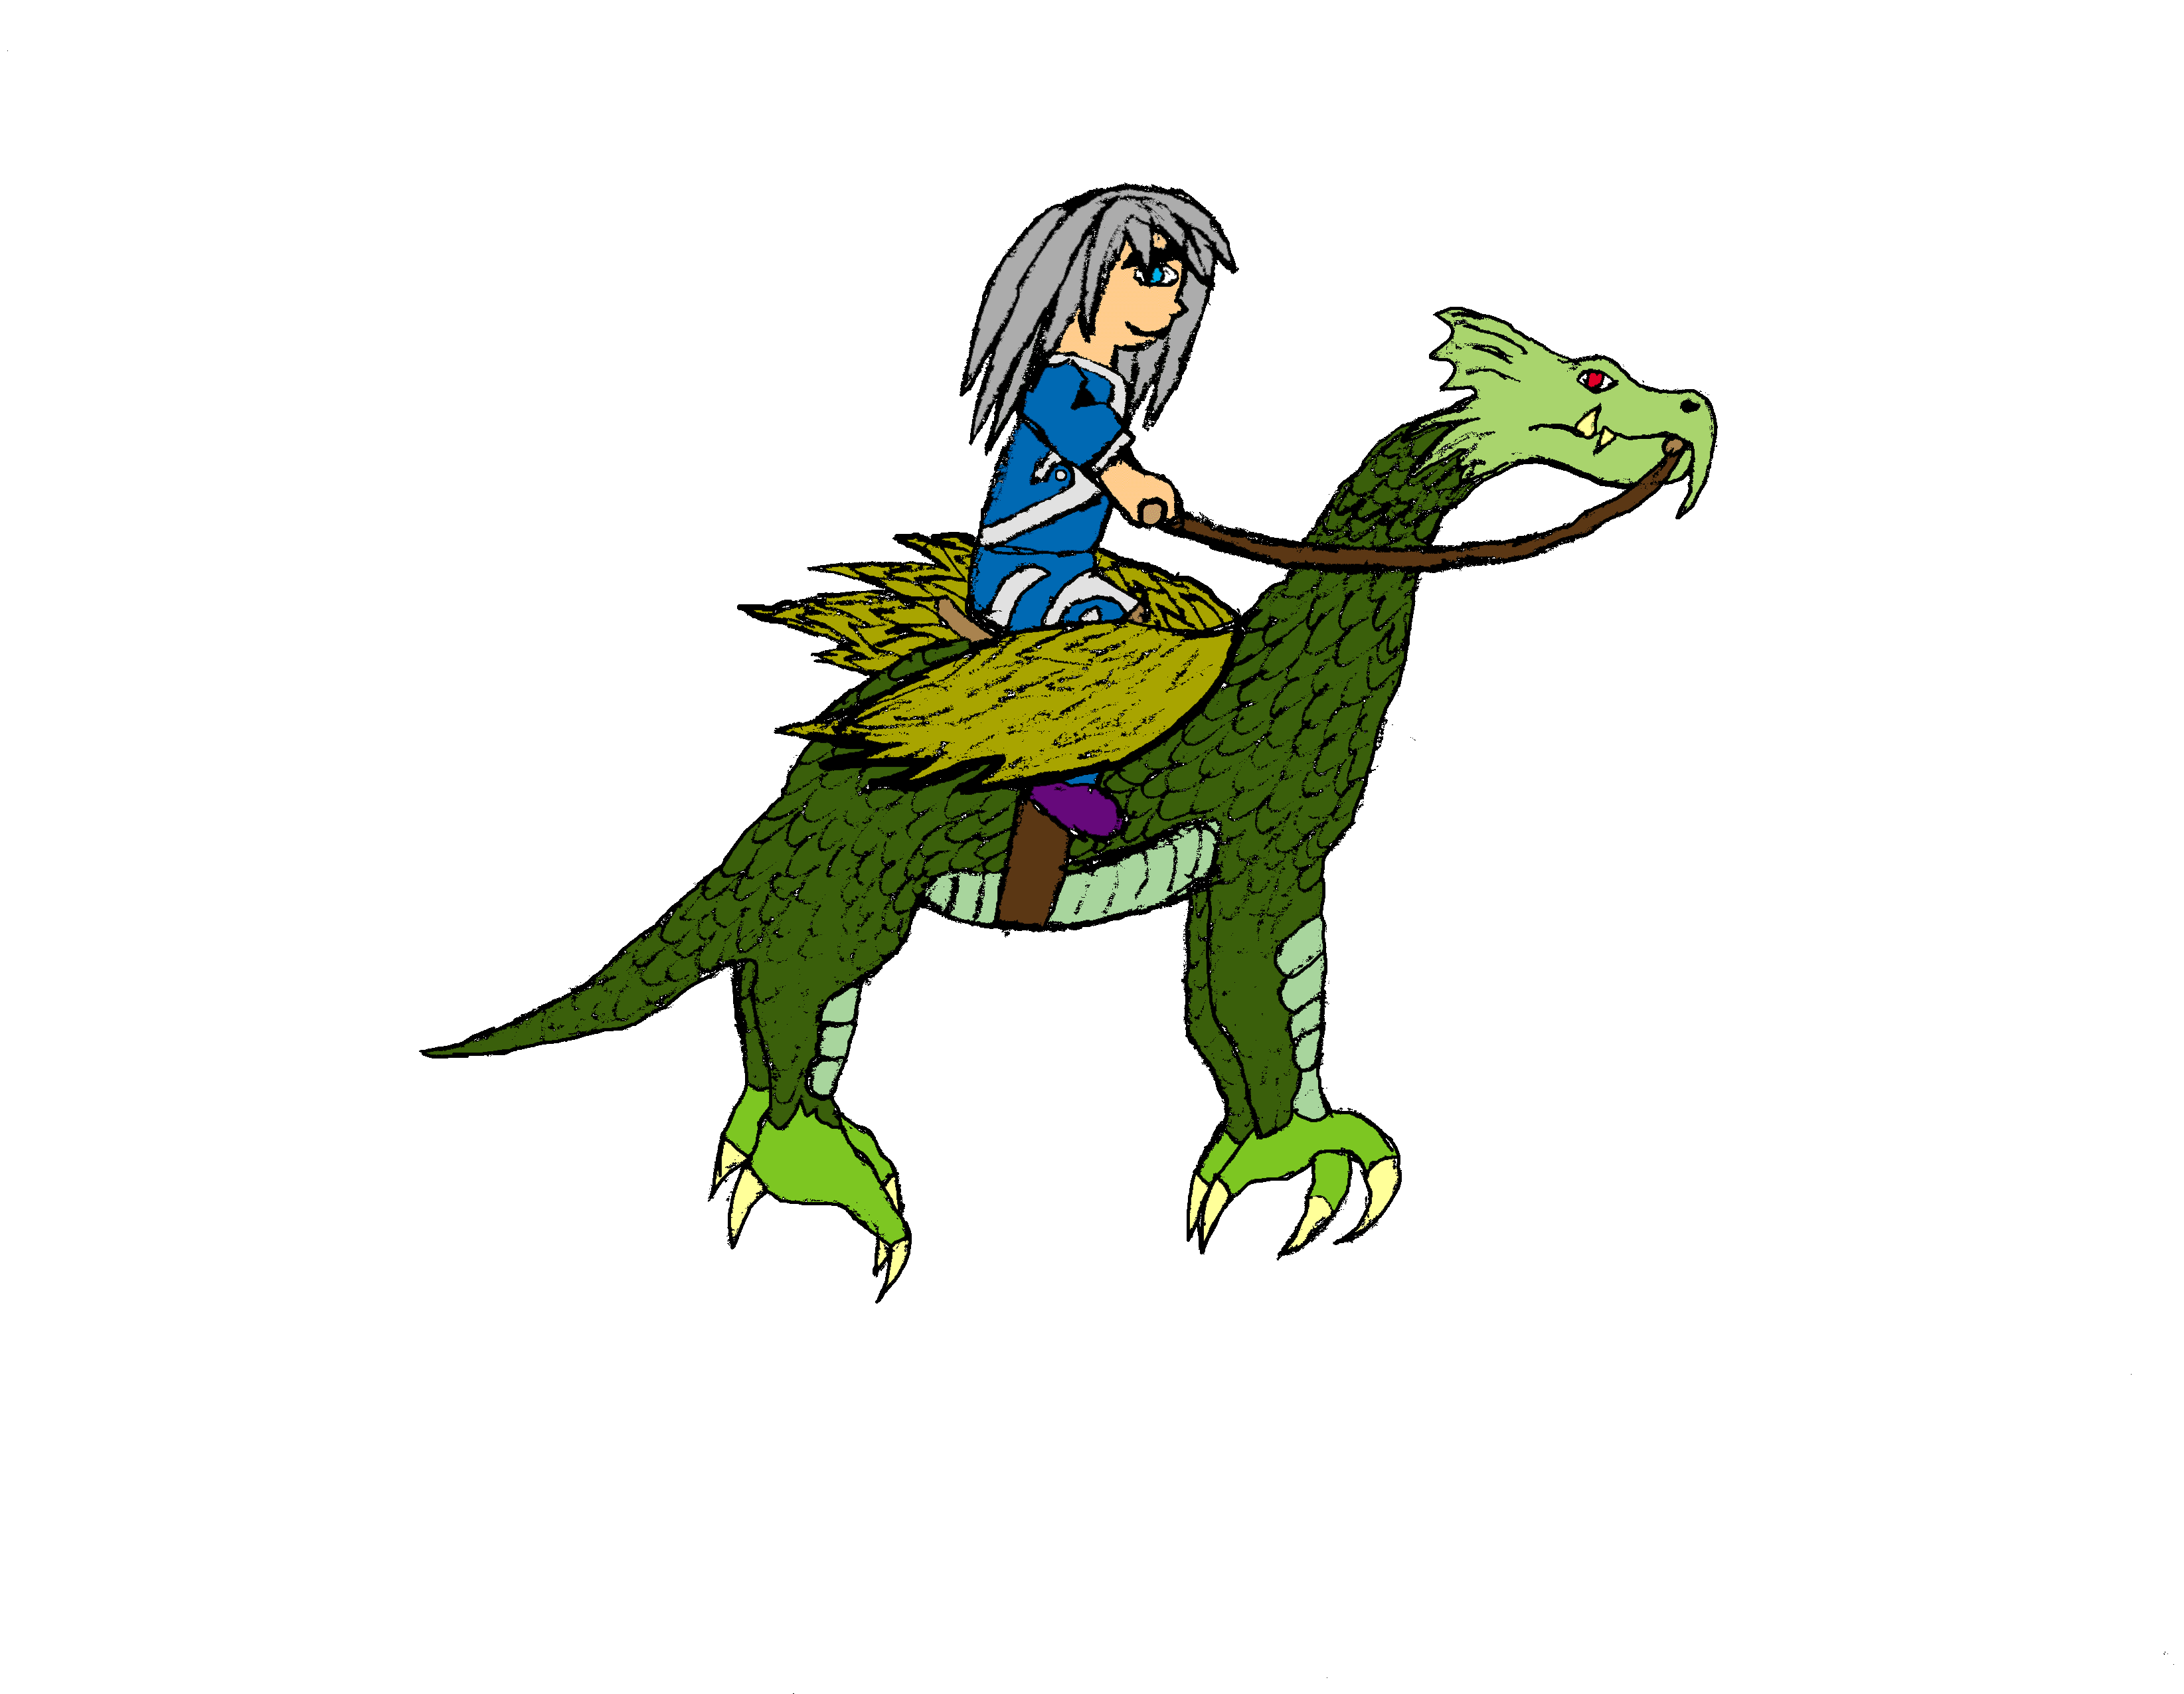 genis sage riding "dragon tours" dragon by archeological-mania